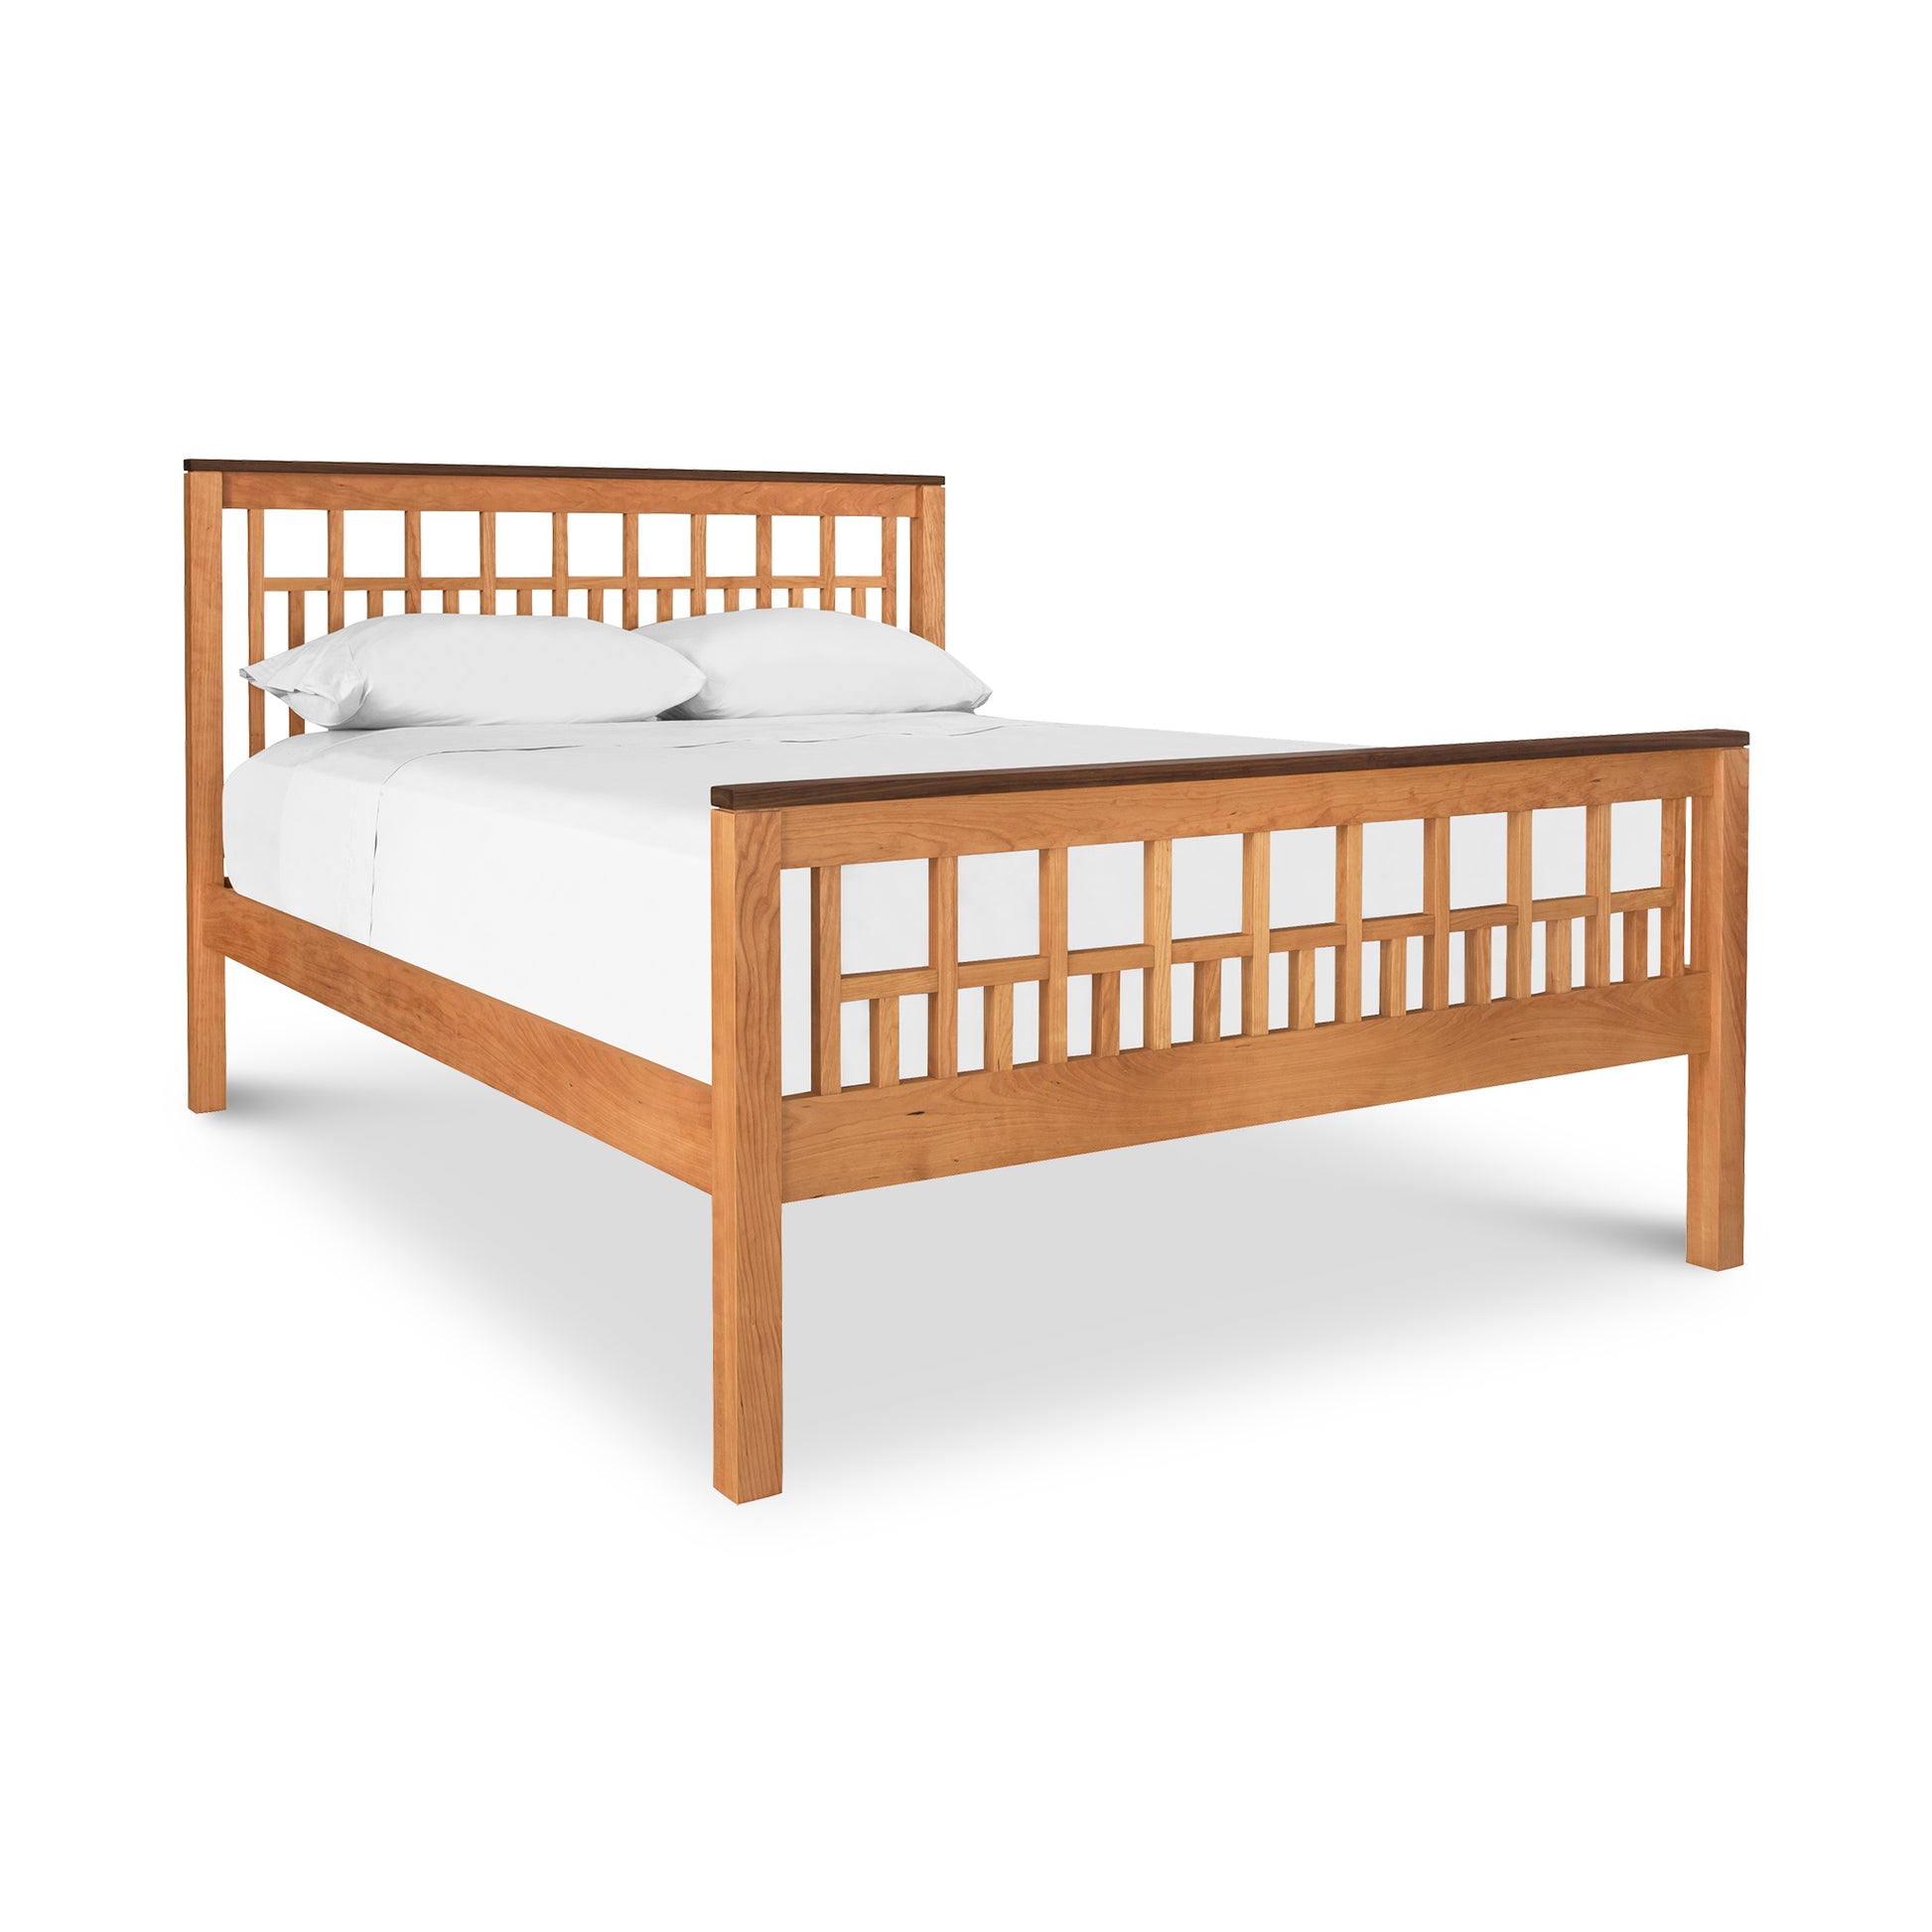 An elegant Modern American Trellis Bed from Vermont Furniture Designs, with a wooden headboard and footboard, perfect for high-end bedroom furniture.